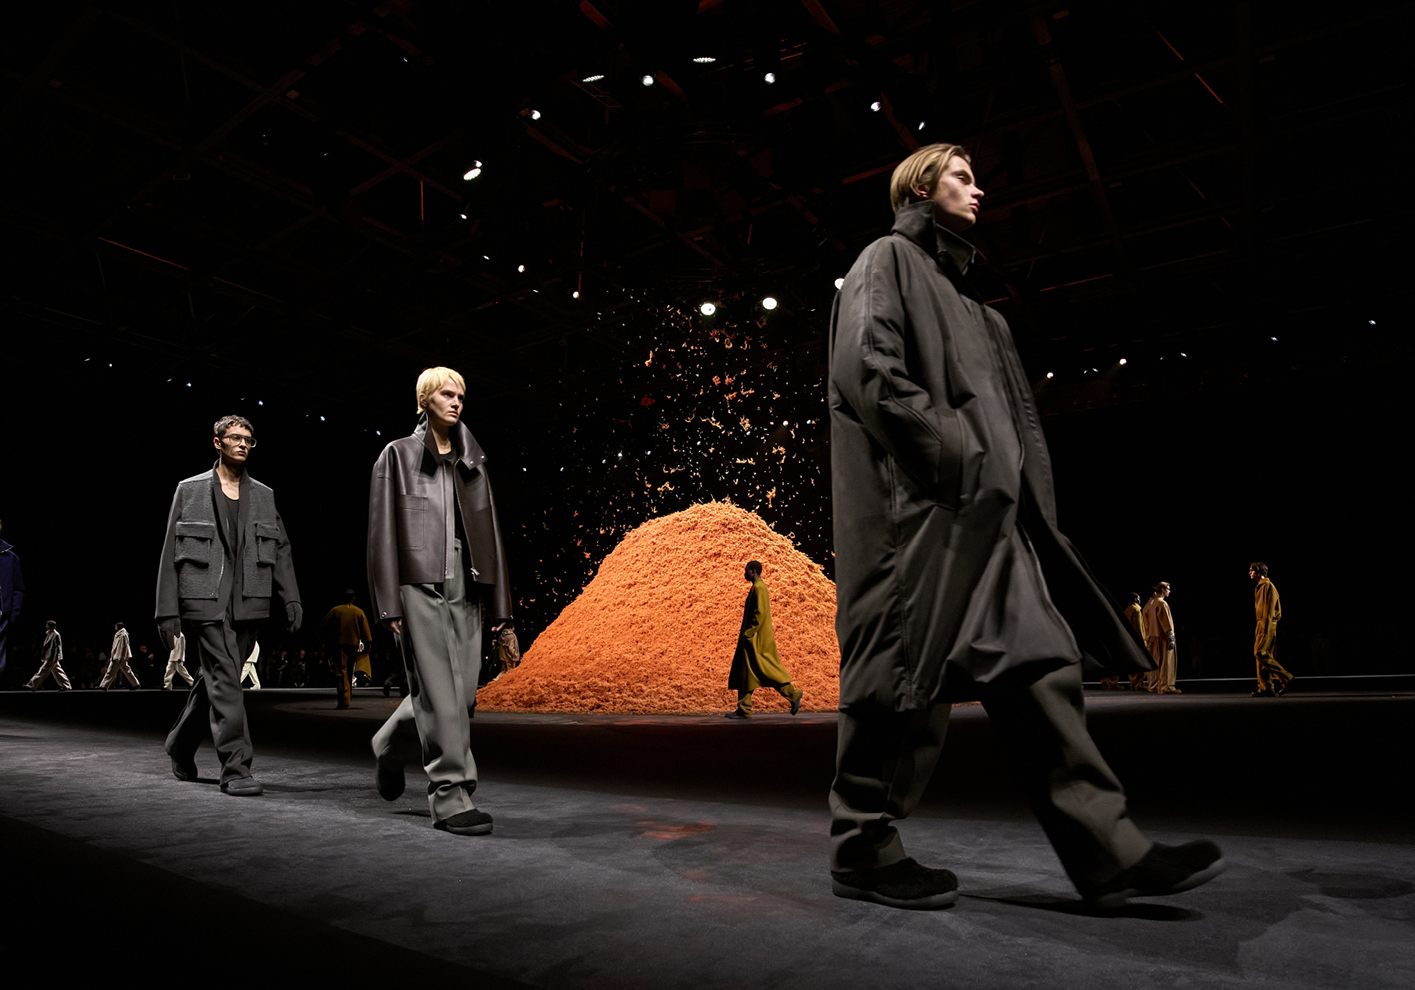 A snowfall of cashmere in Zegna’s signature vicuna hue formed a mountain at the centre of the catwalk space